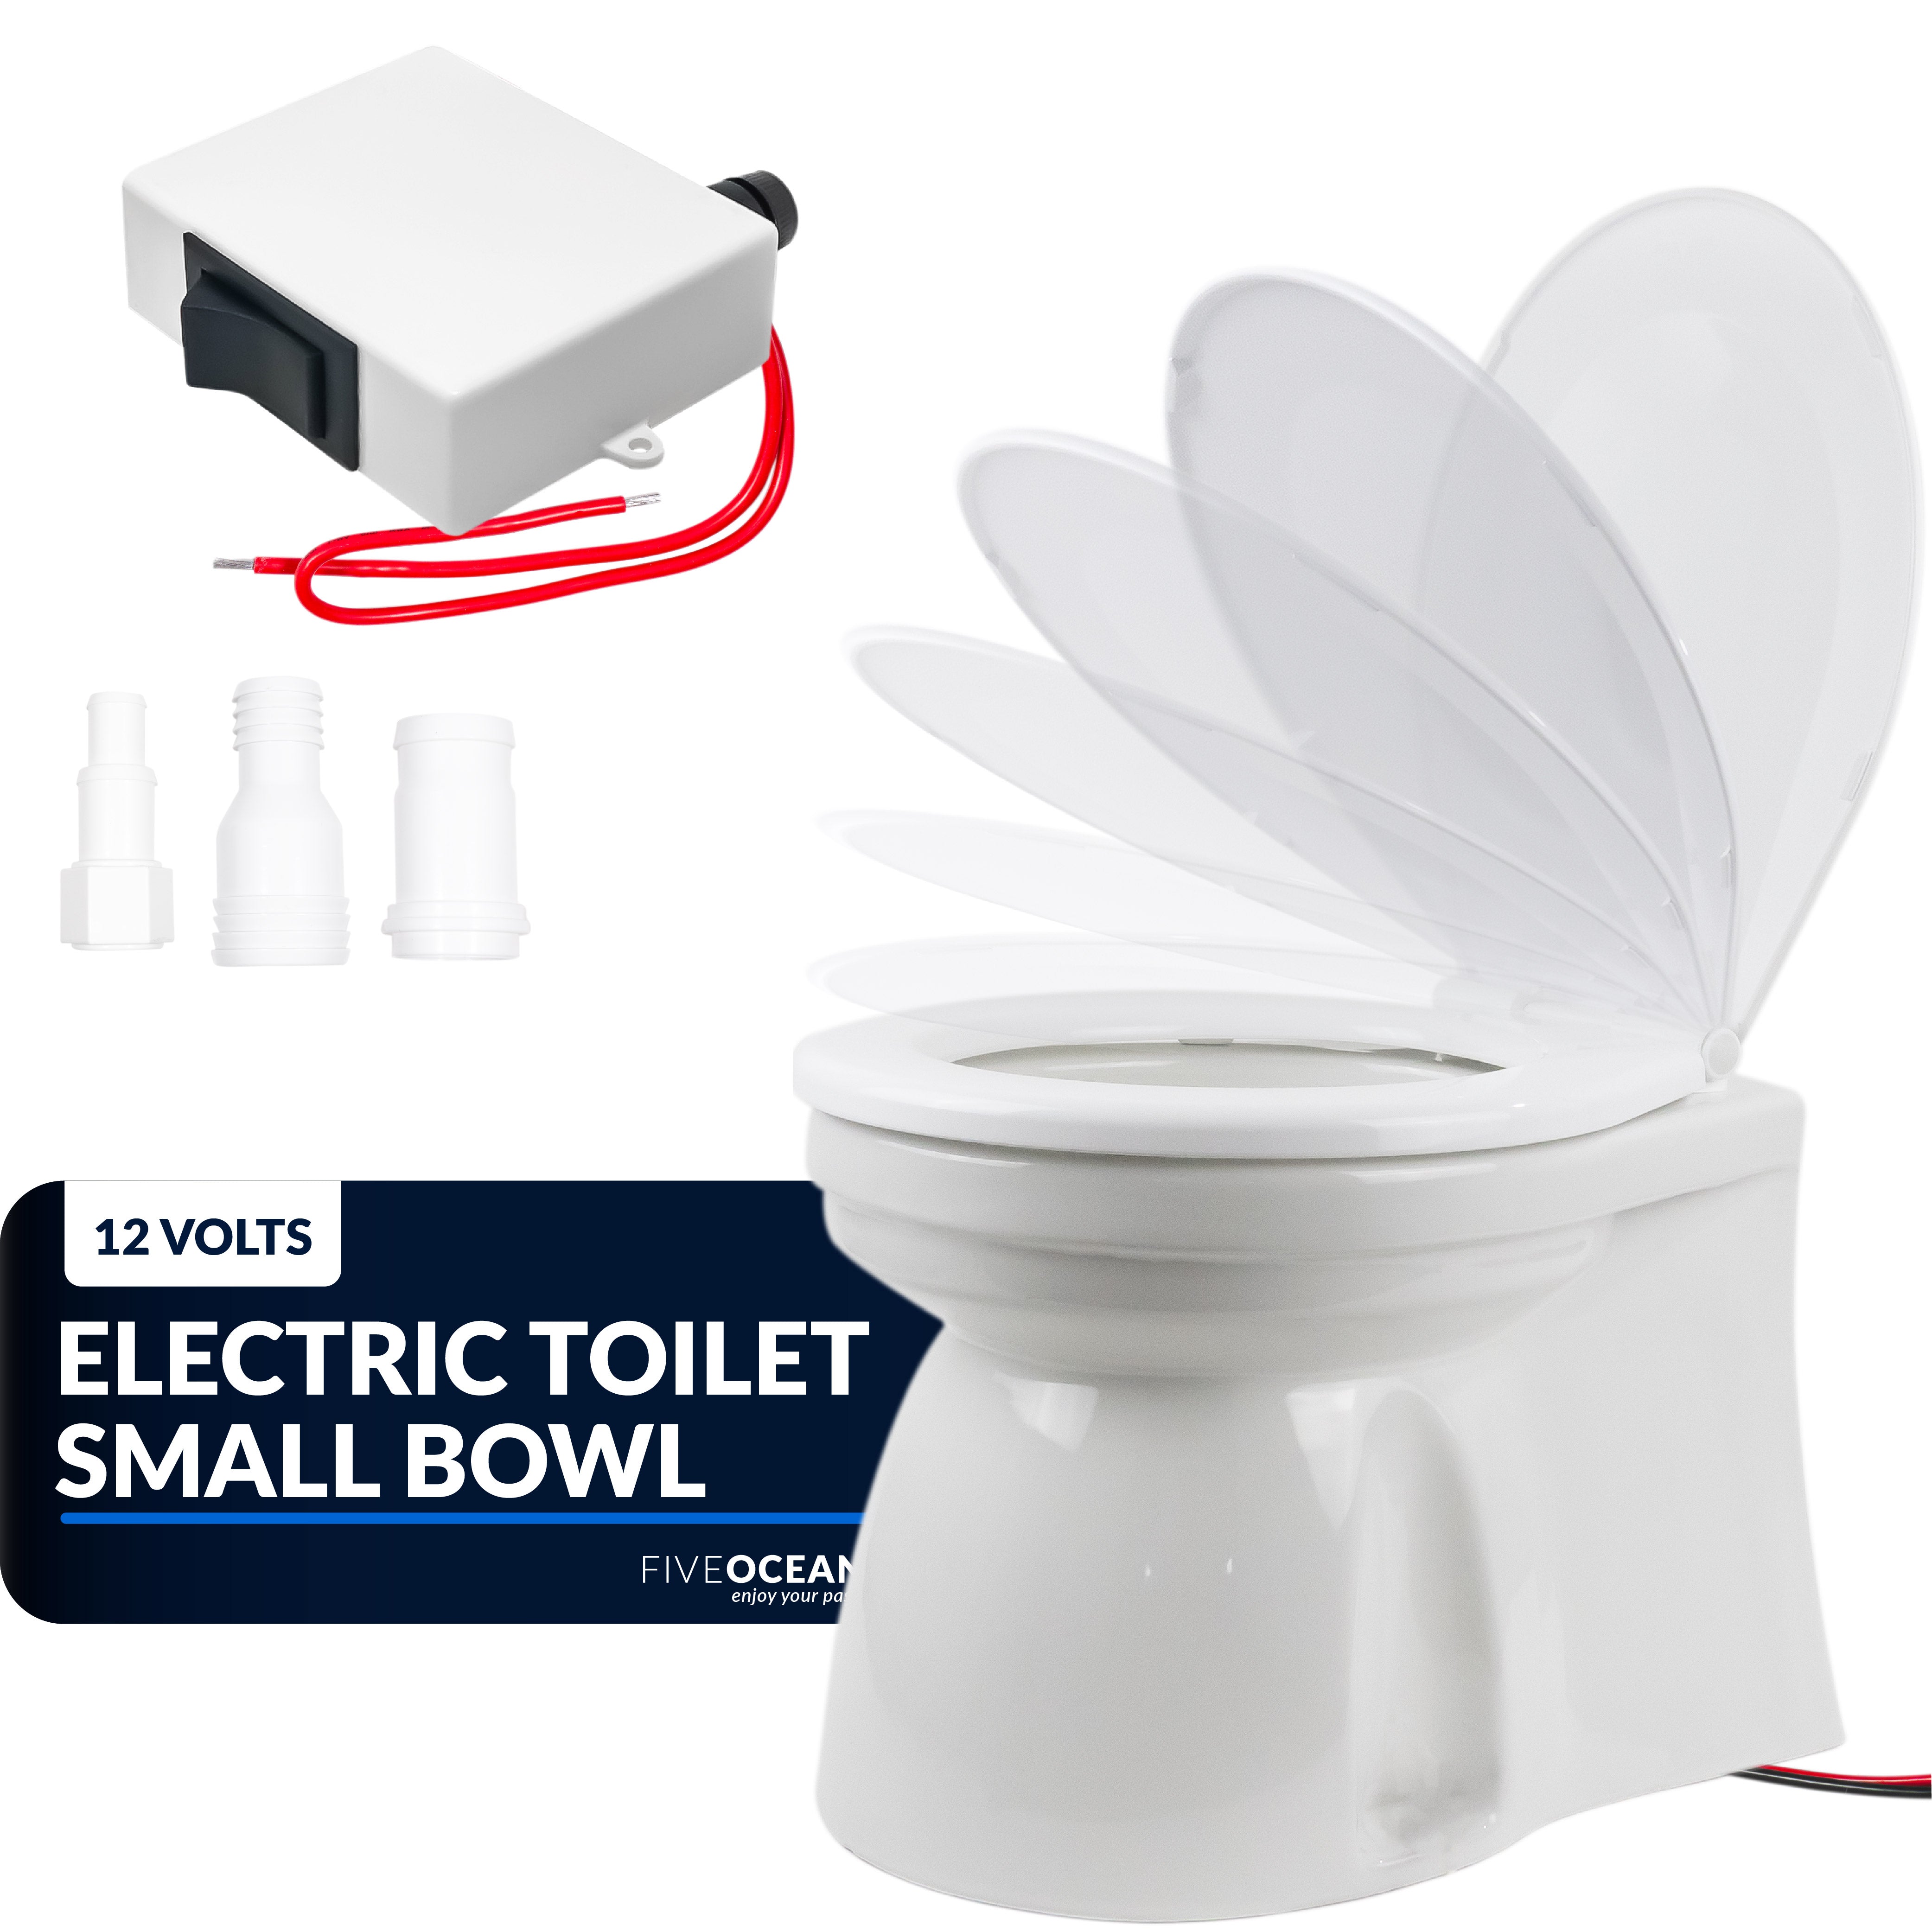 TMC Electric Marine Toilet, RV Toilet with Clamp-On Hose Connection Boat Toilet, Compact Design Bowl, Household Style Heavy-Duty Macerator Pump, On-Off Flush Control, Quiet Soft-Close Lid 12V - FO1600